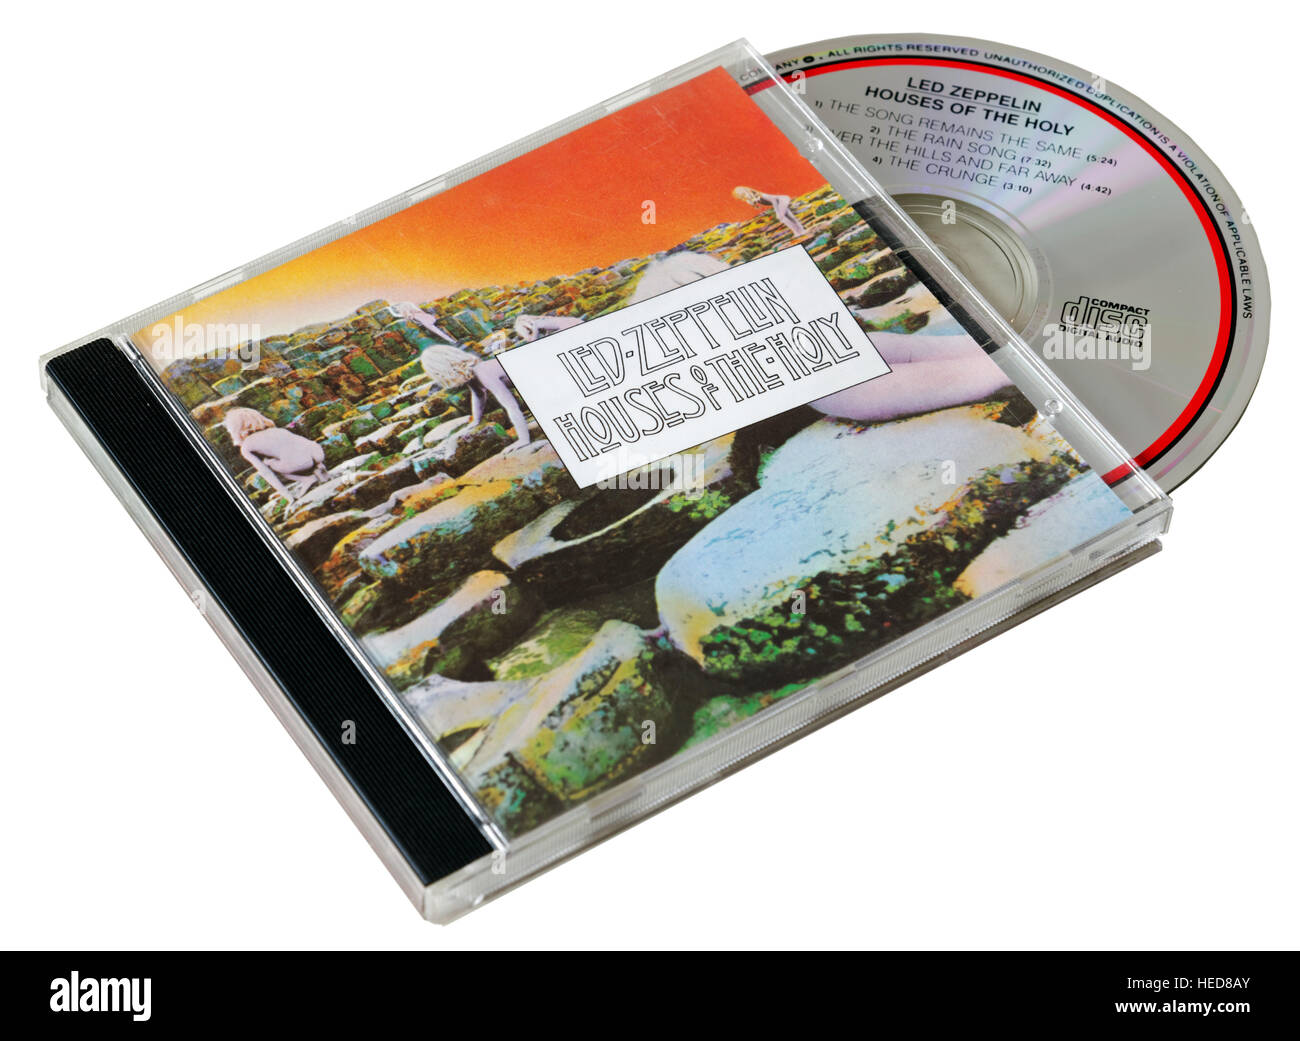 Led Zeppelin Houses of the Holy CD Banque D'Images